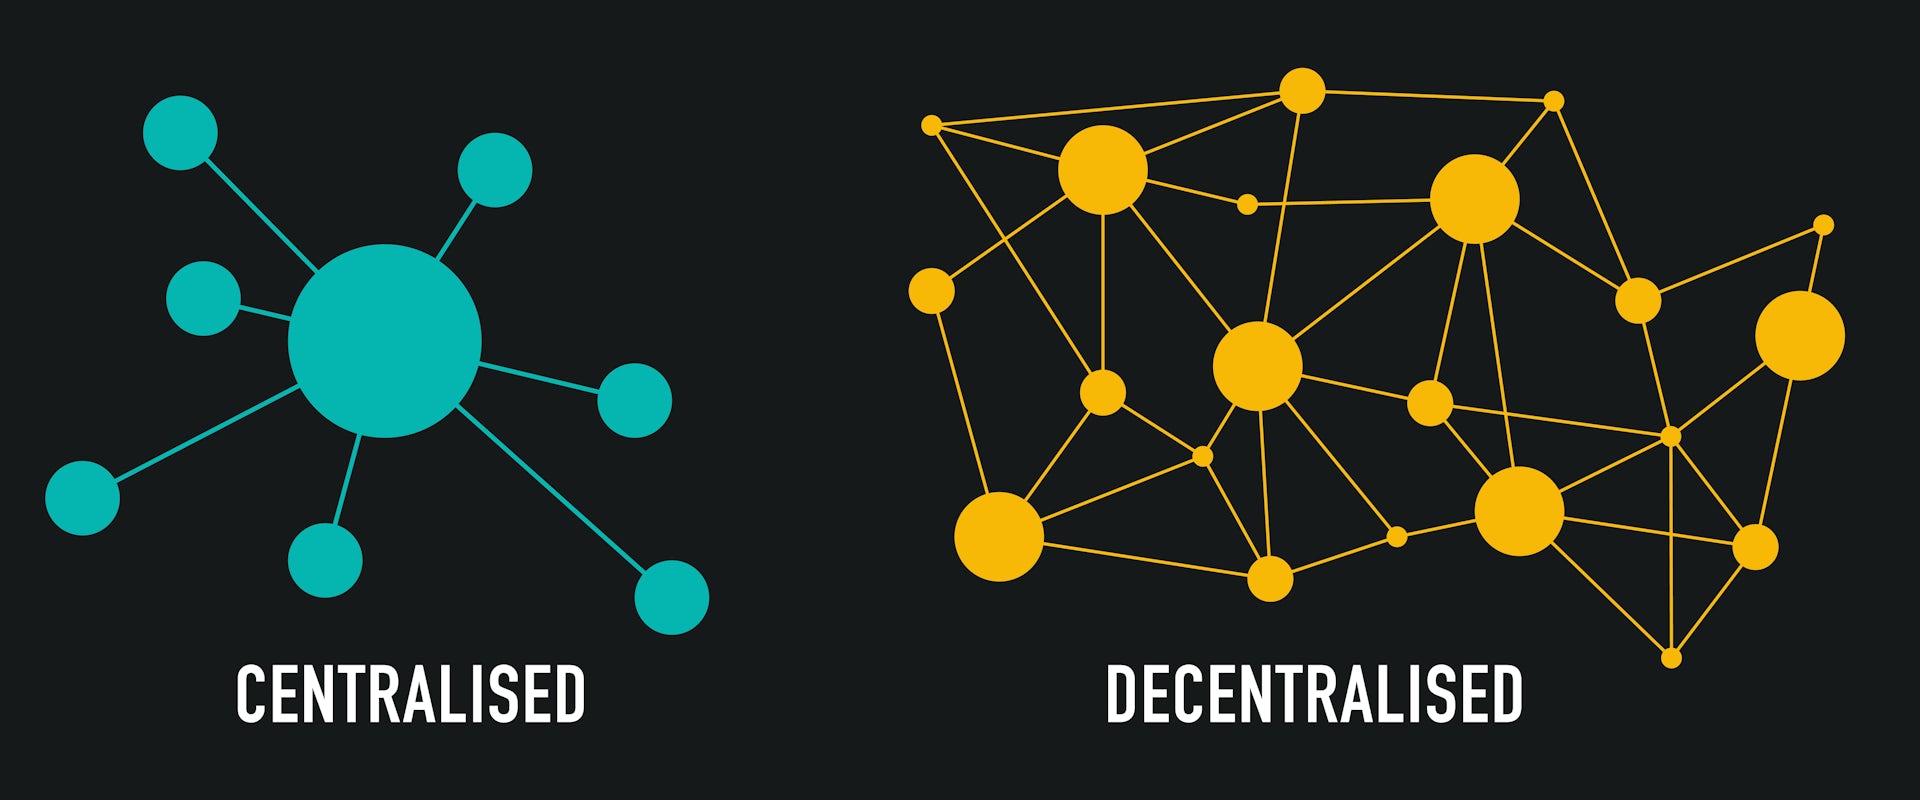 Two illustrations of networks — a blue one showing a central source of power, and a yellow one showing multiple interconnecting nodes